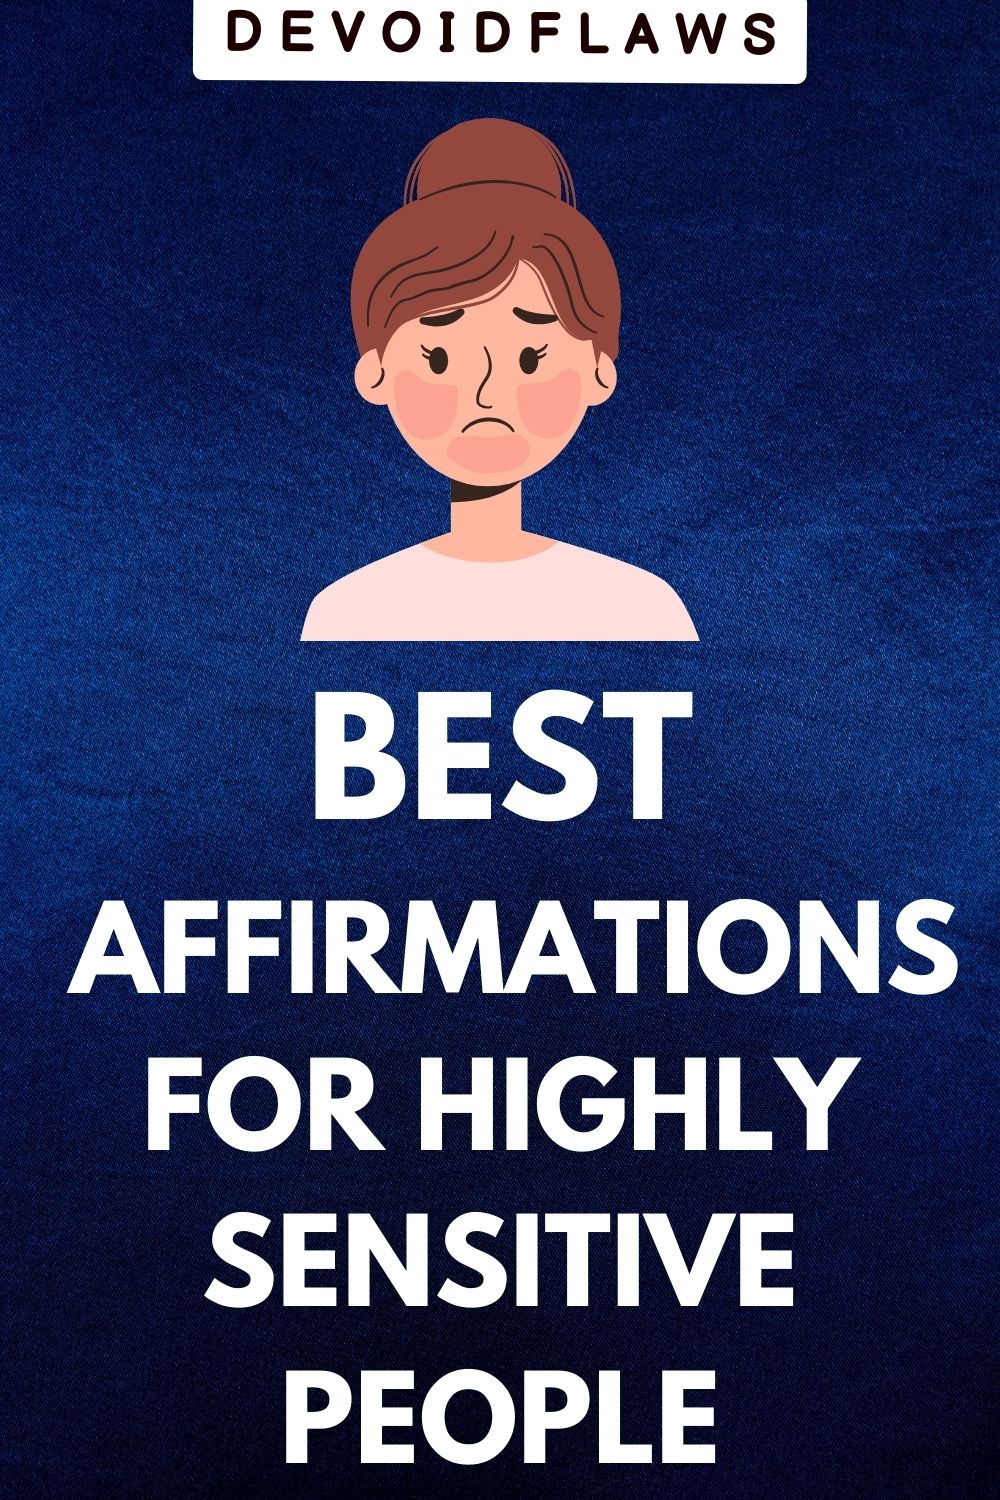 blue background image with text "best affirmations for highly sensitive people"